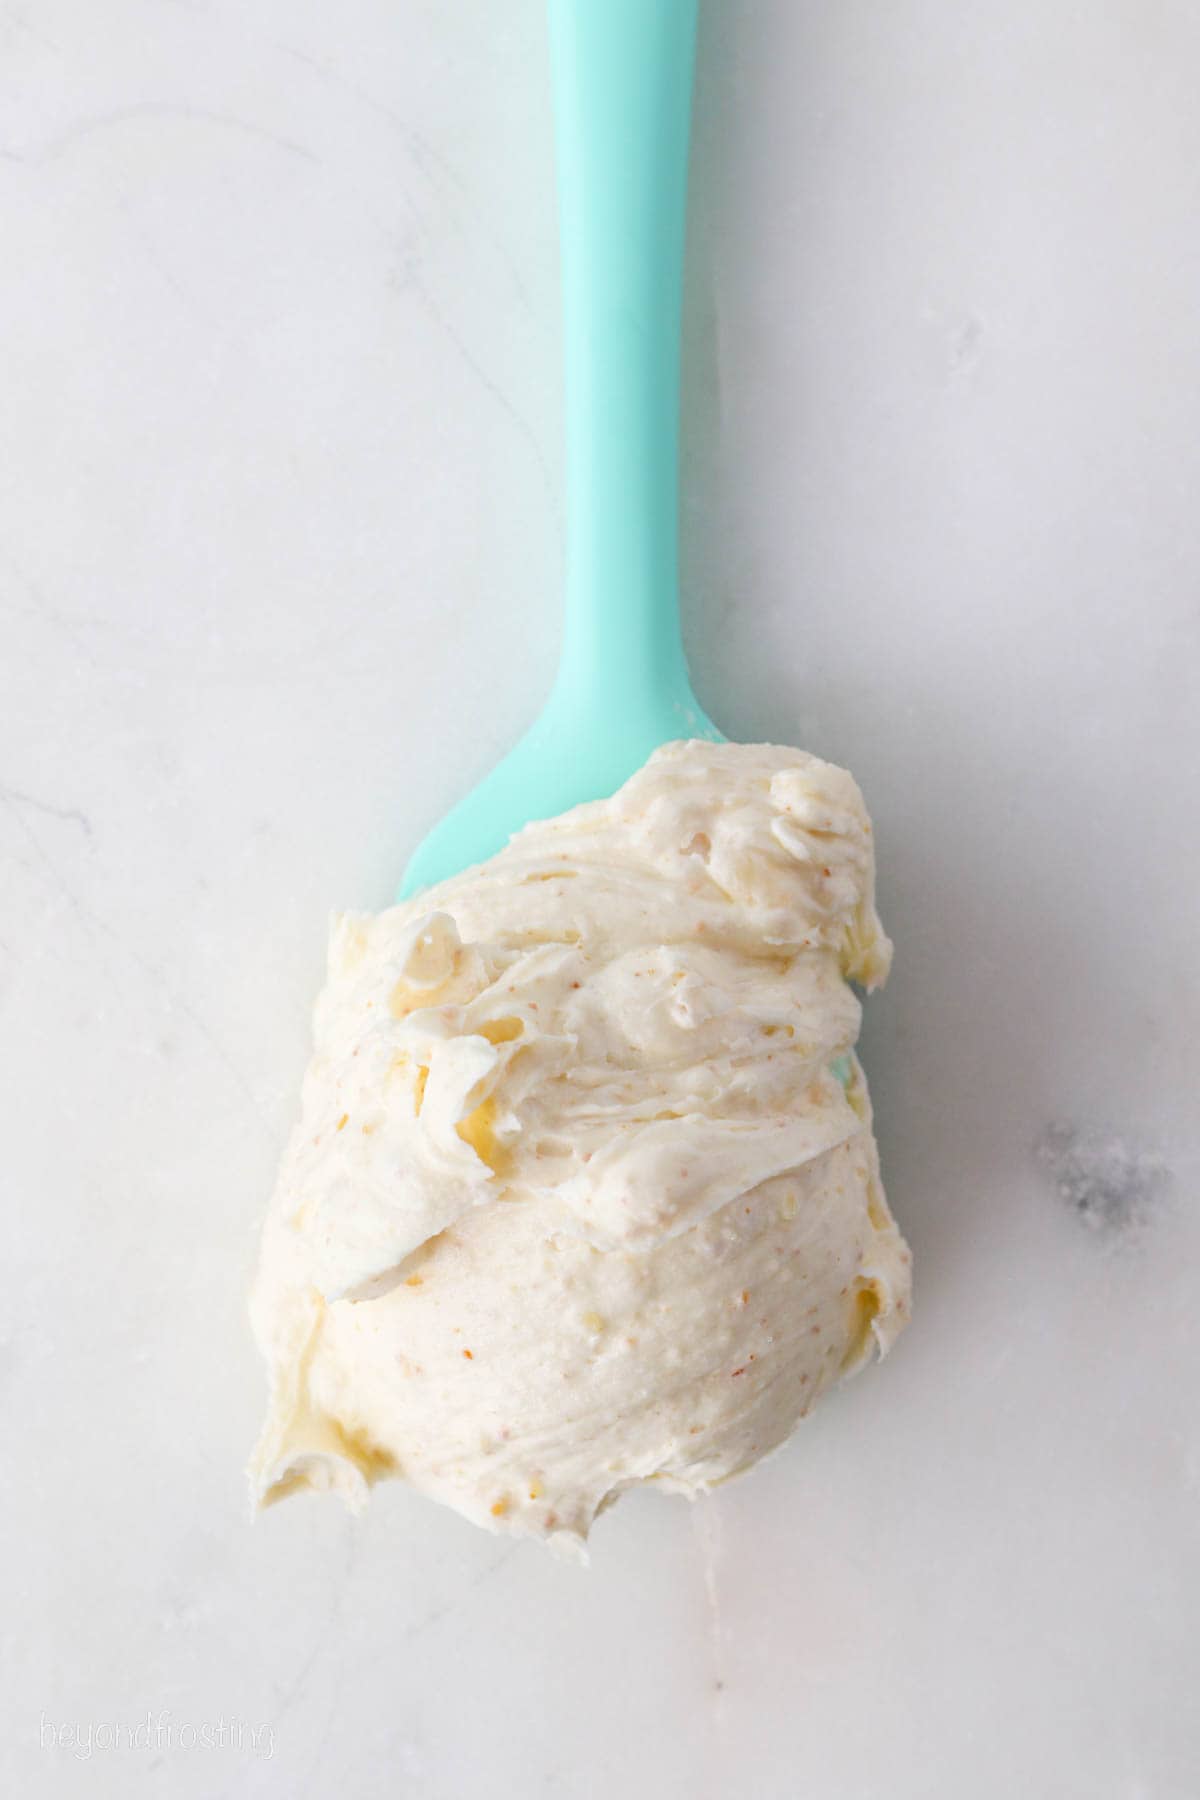 Brown butter frosting at the end of a blue spatula resting on a marble countertop.